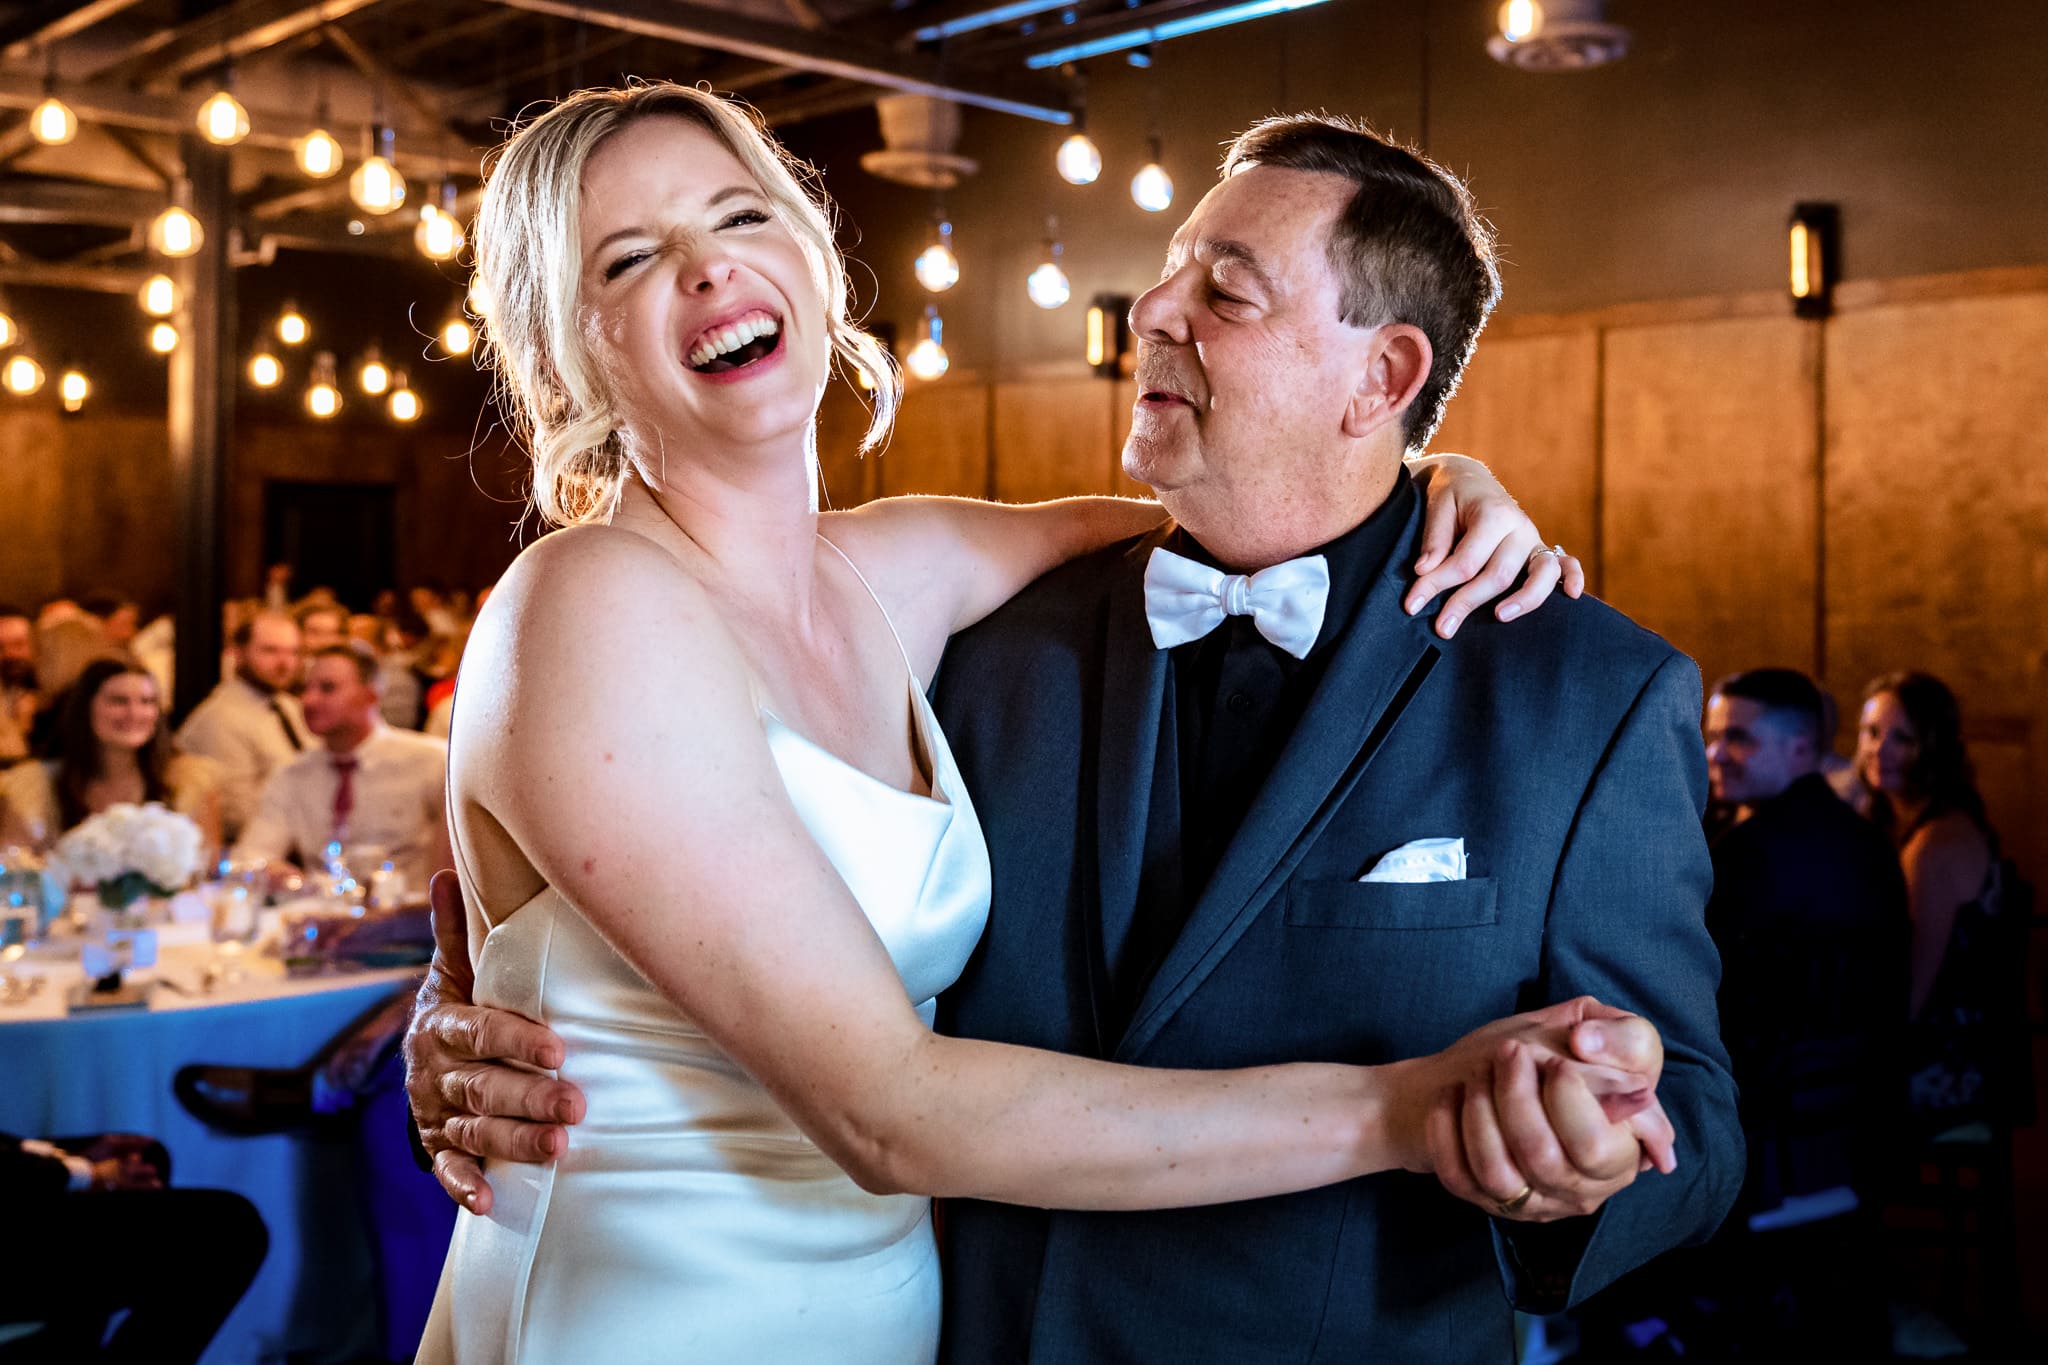 bride laughs as her father looks at her during the father daughter dance | photo by Kivus & Camera